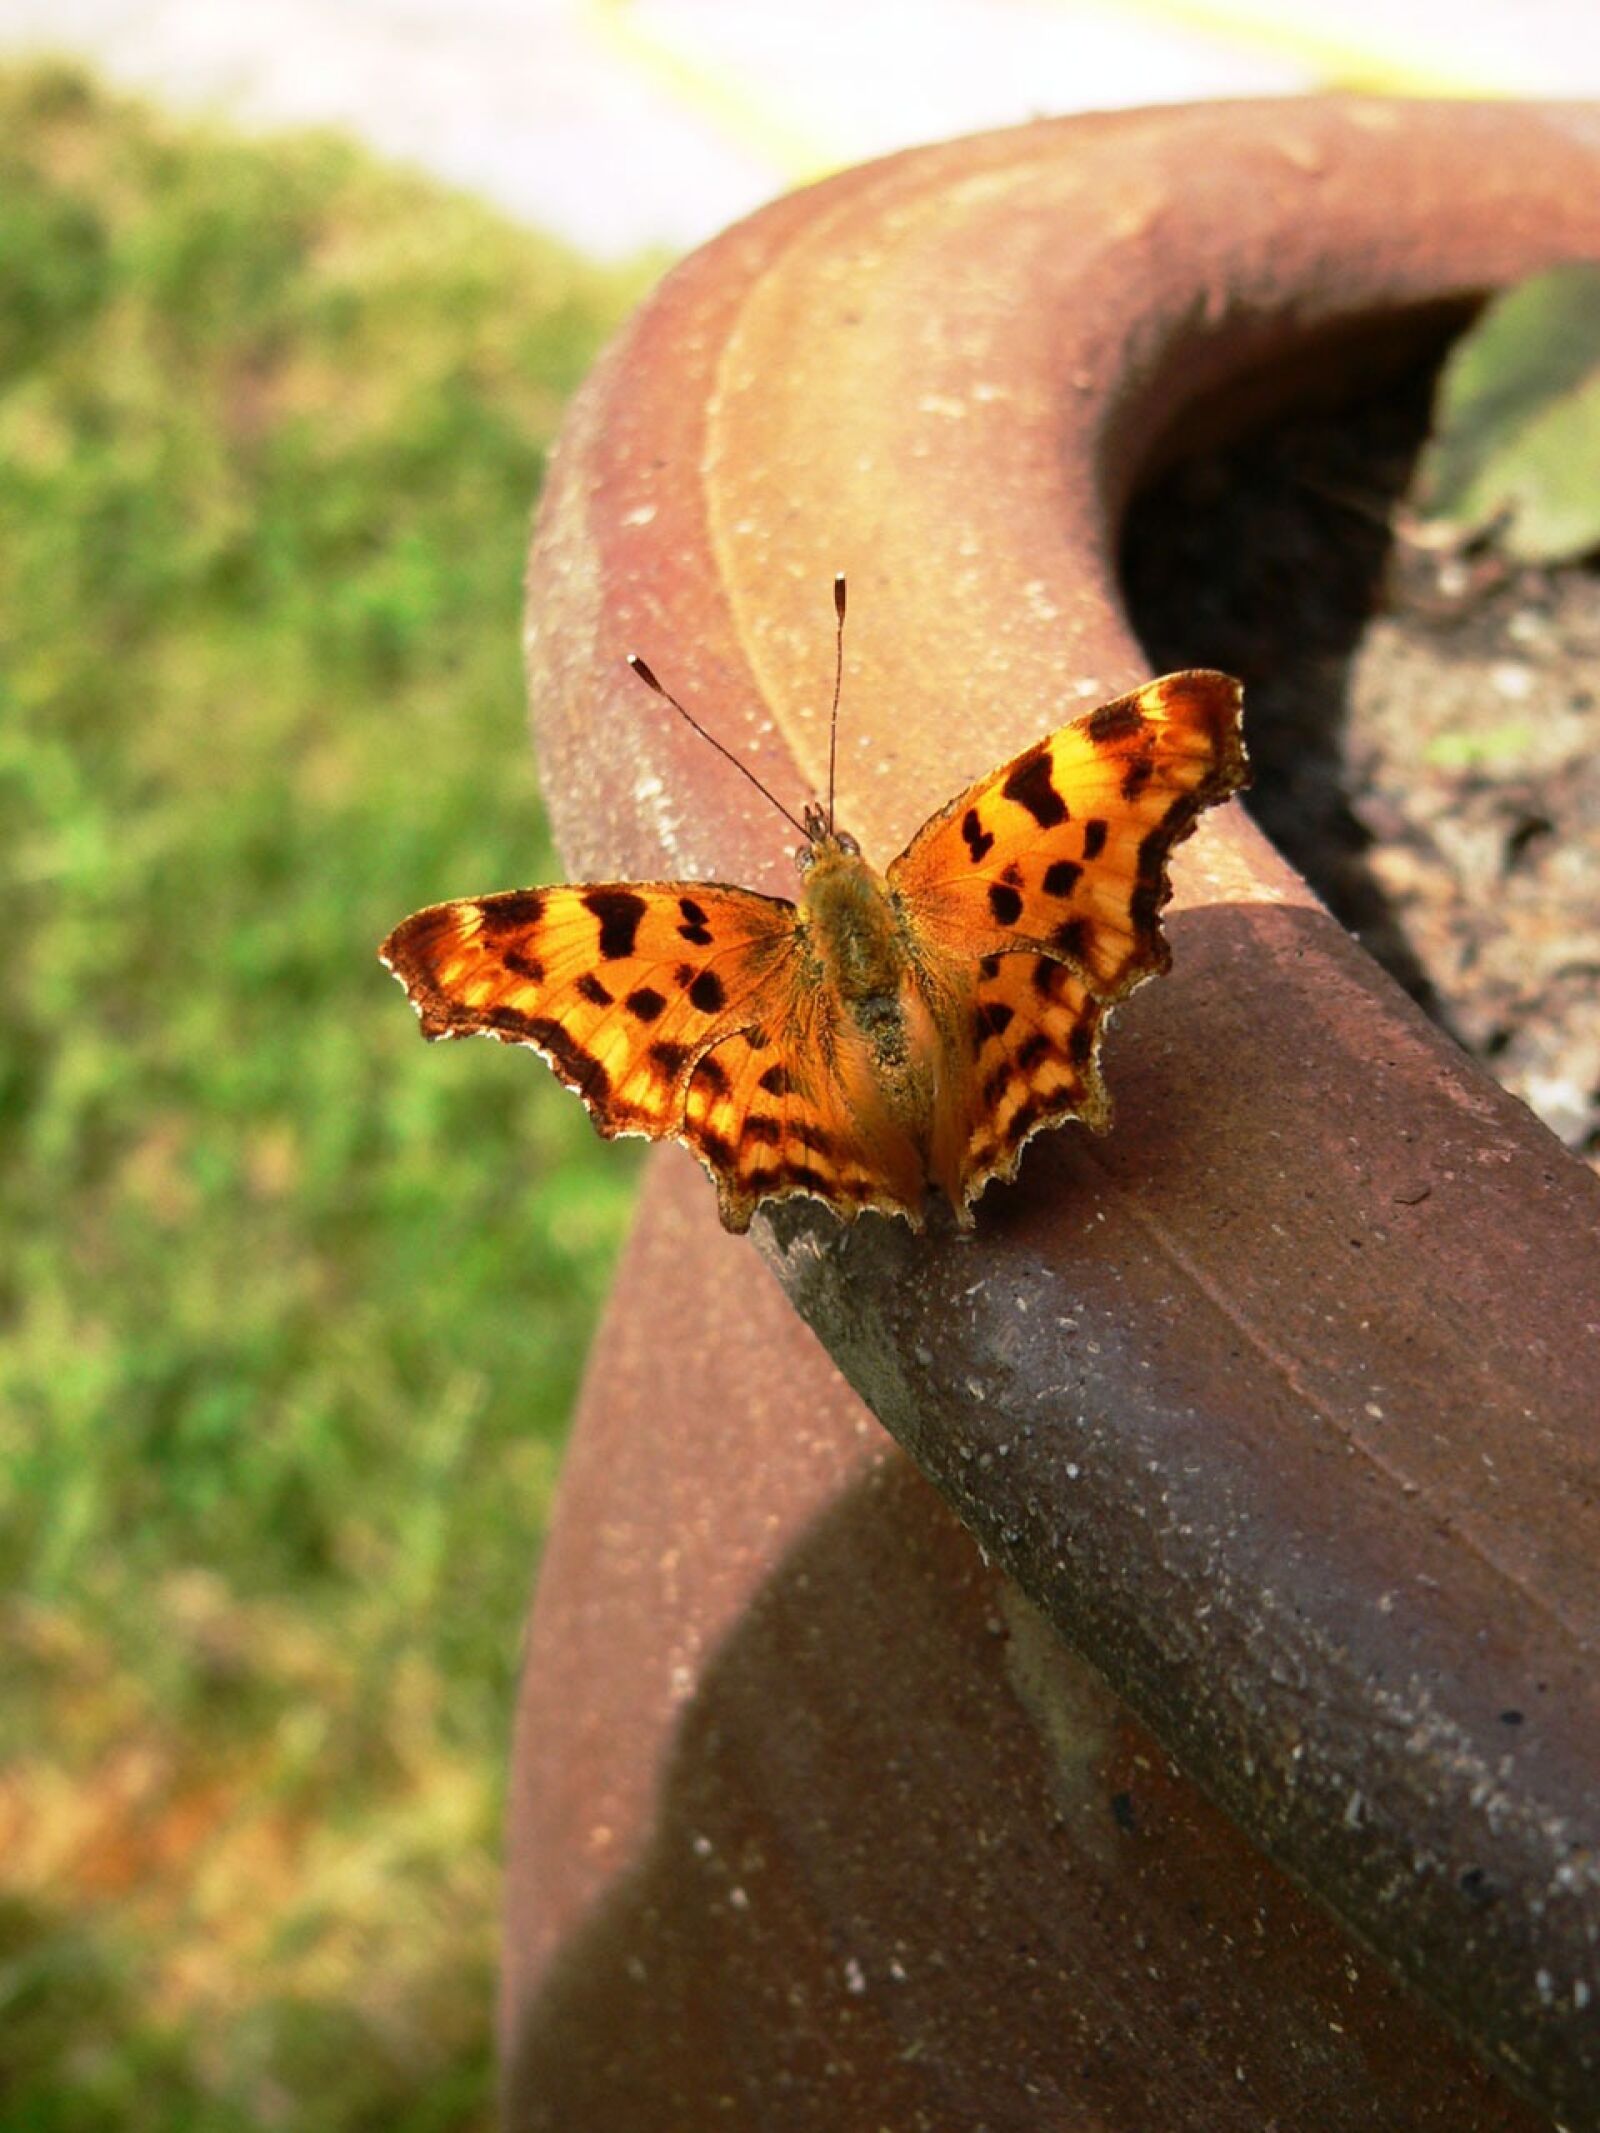 Panasonic DMC-FZ20 sample photo. Butterfly, painted lady, insect photography